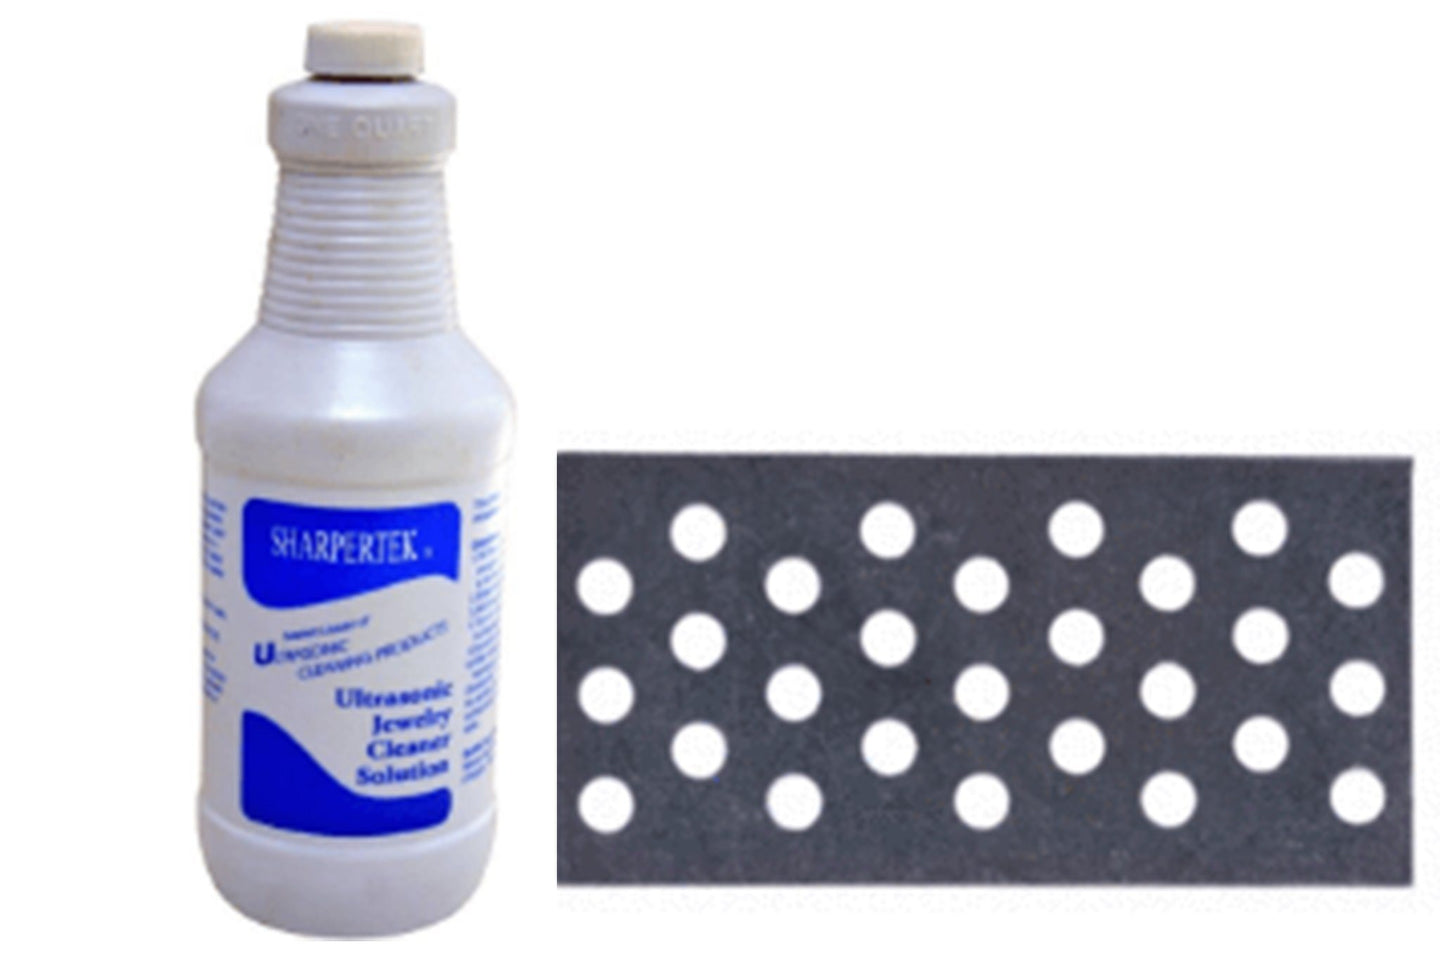 SharperTek Jewelry Cleaning Solution & Silver Cleaning Plate